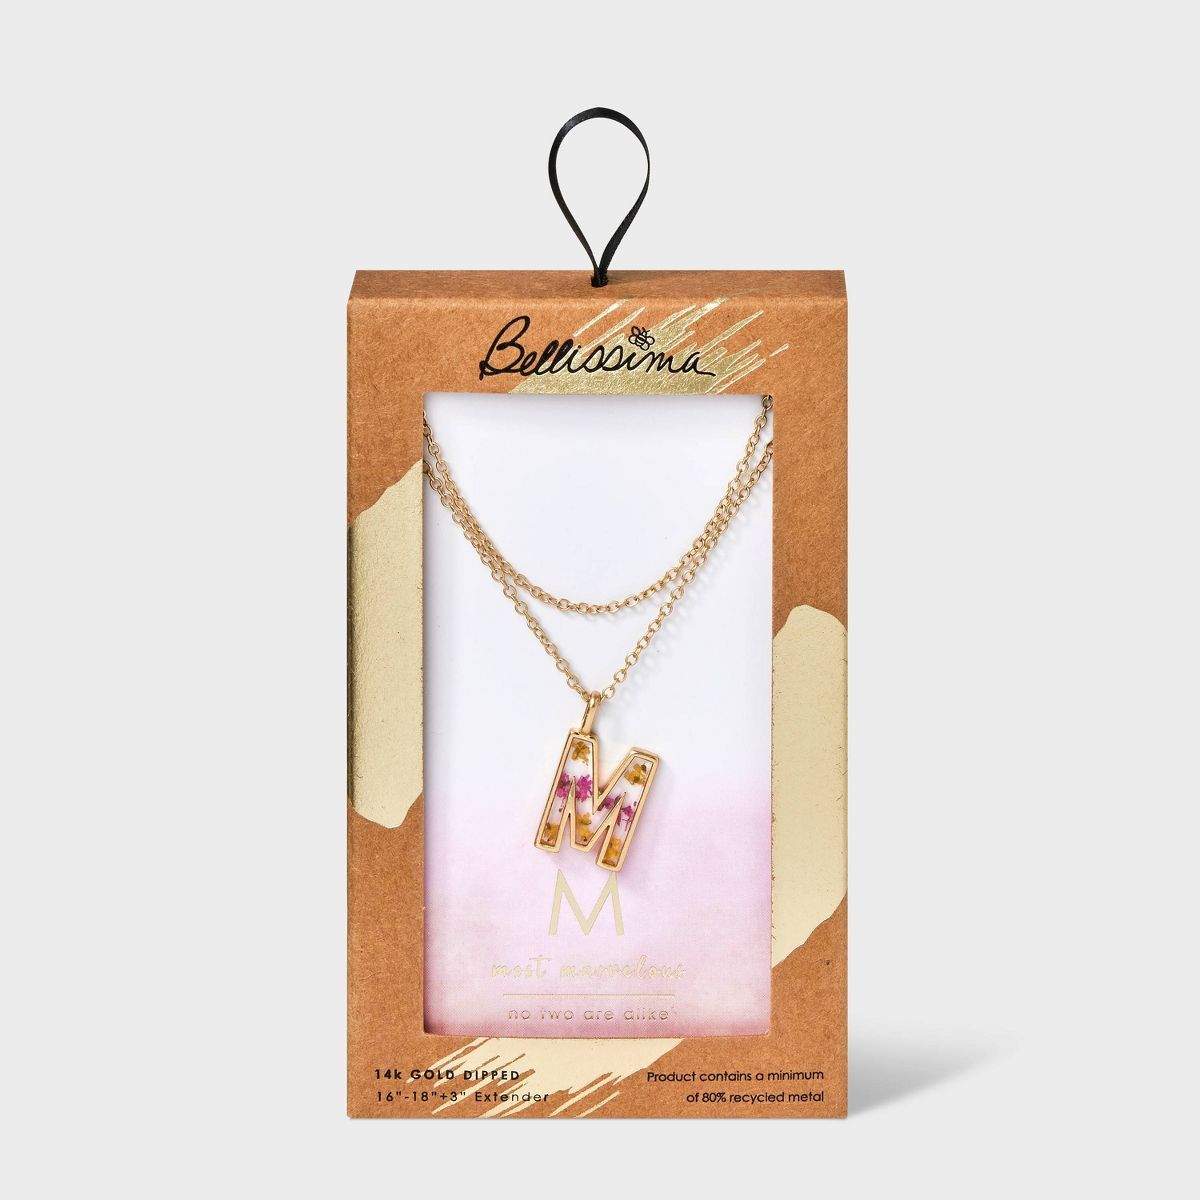 Bella Uno Bellissima Silver Plated Flower Pressed Initial Multi-Strand Necklace - Gold | Target